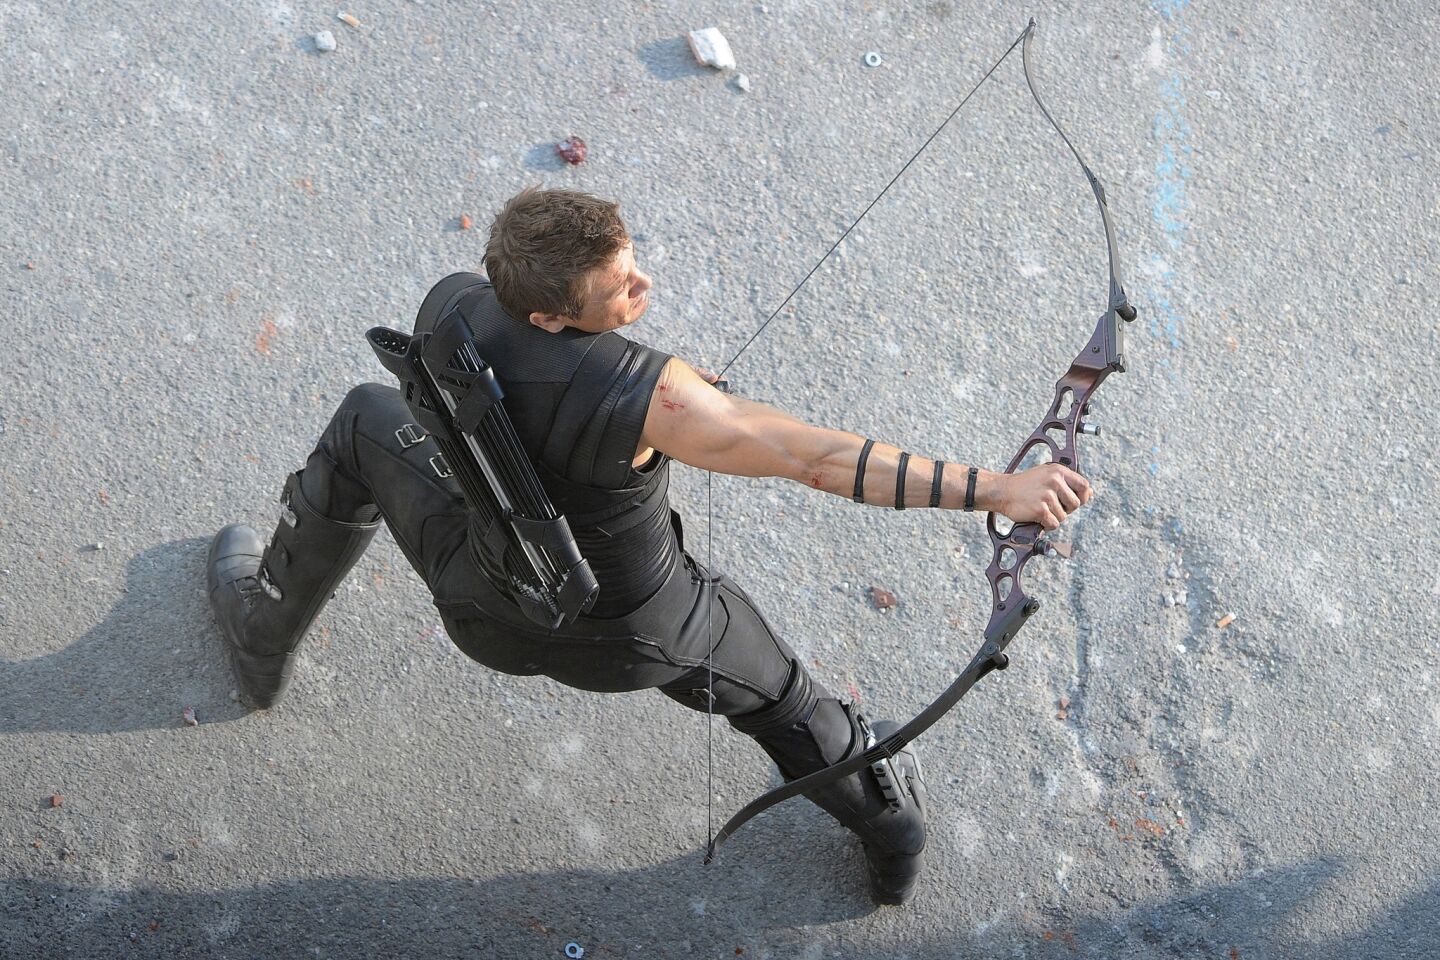 Jeremy Renner films an action scene in Aoasta, Italy, for "Avengers: Age of Ultron.".